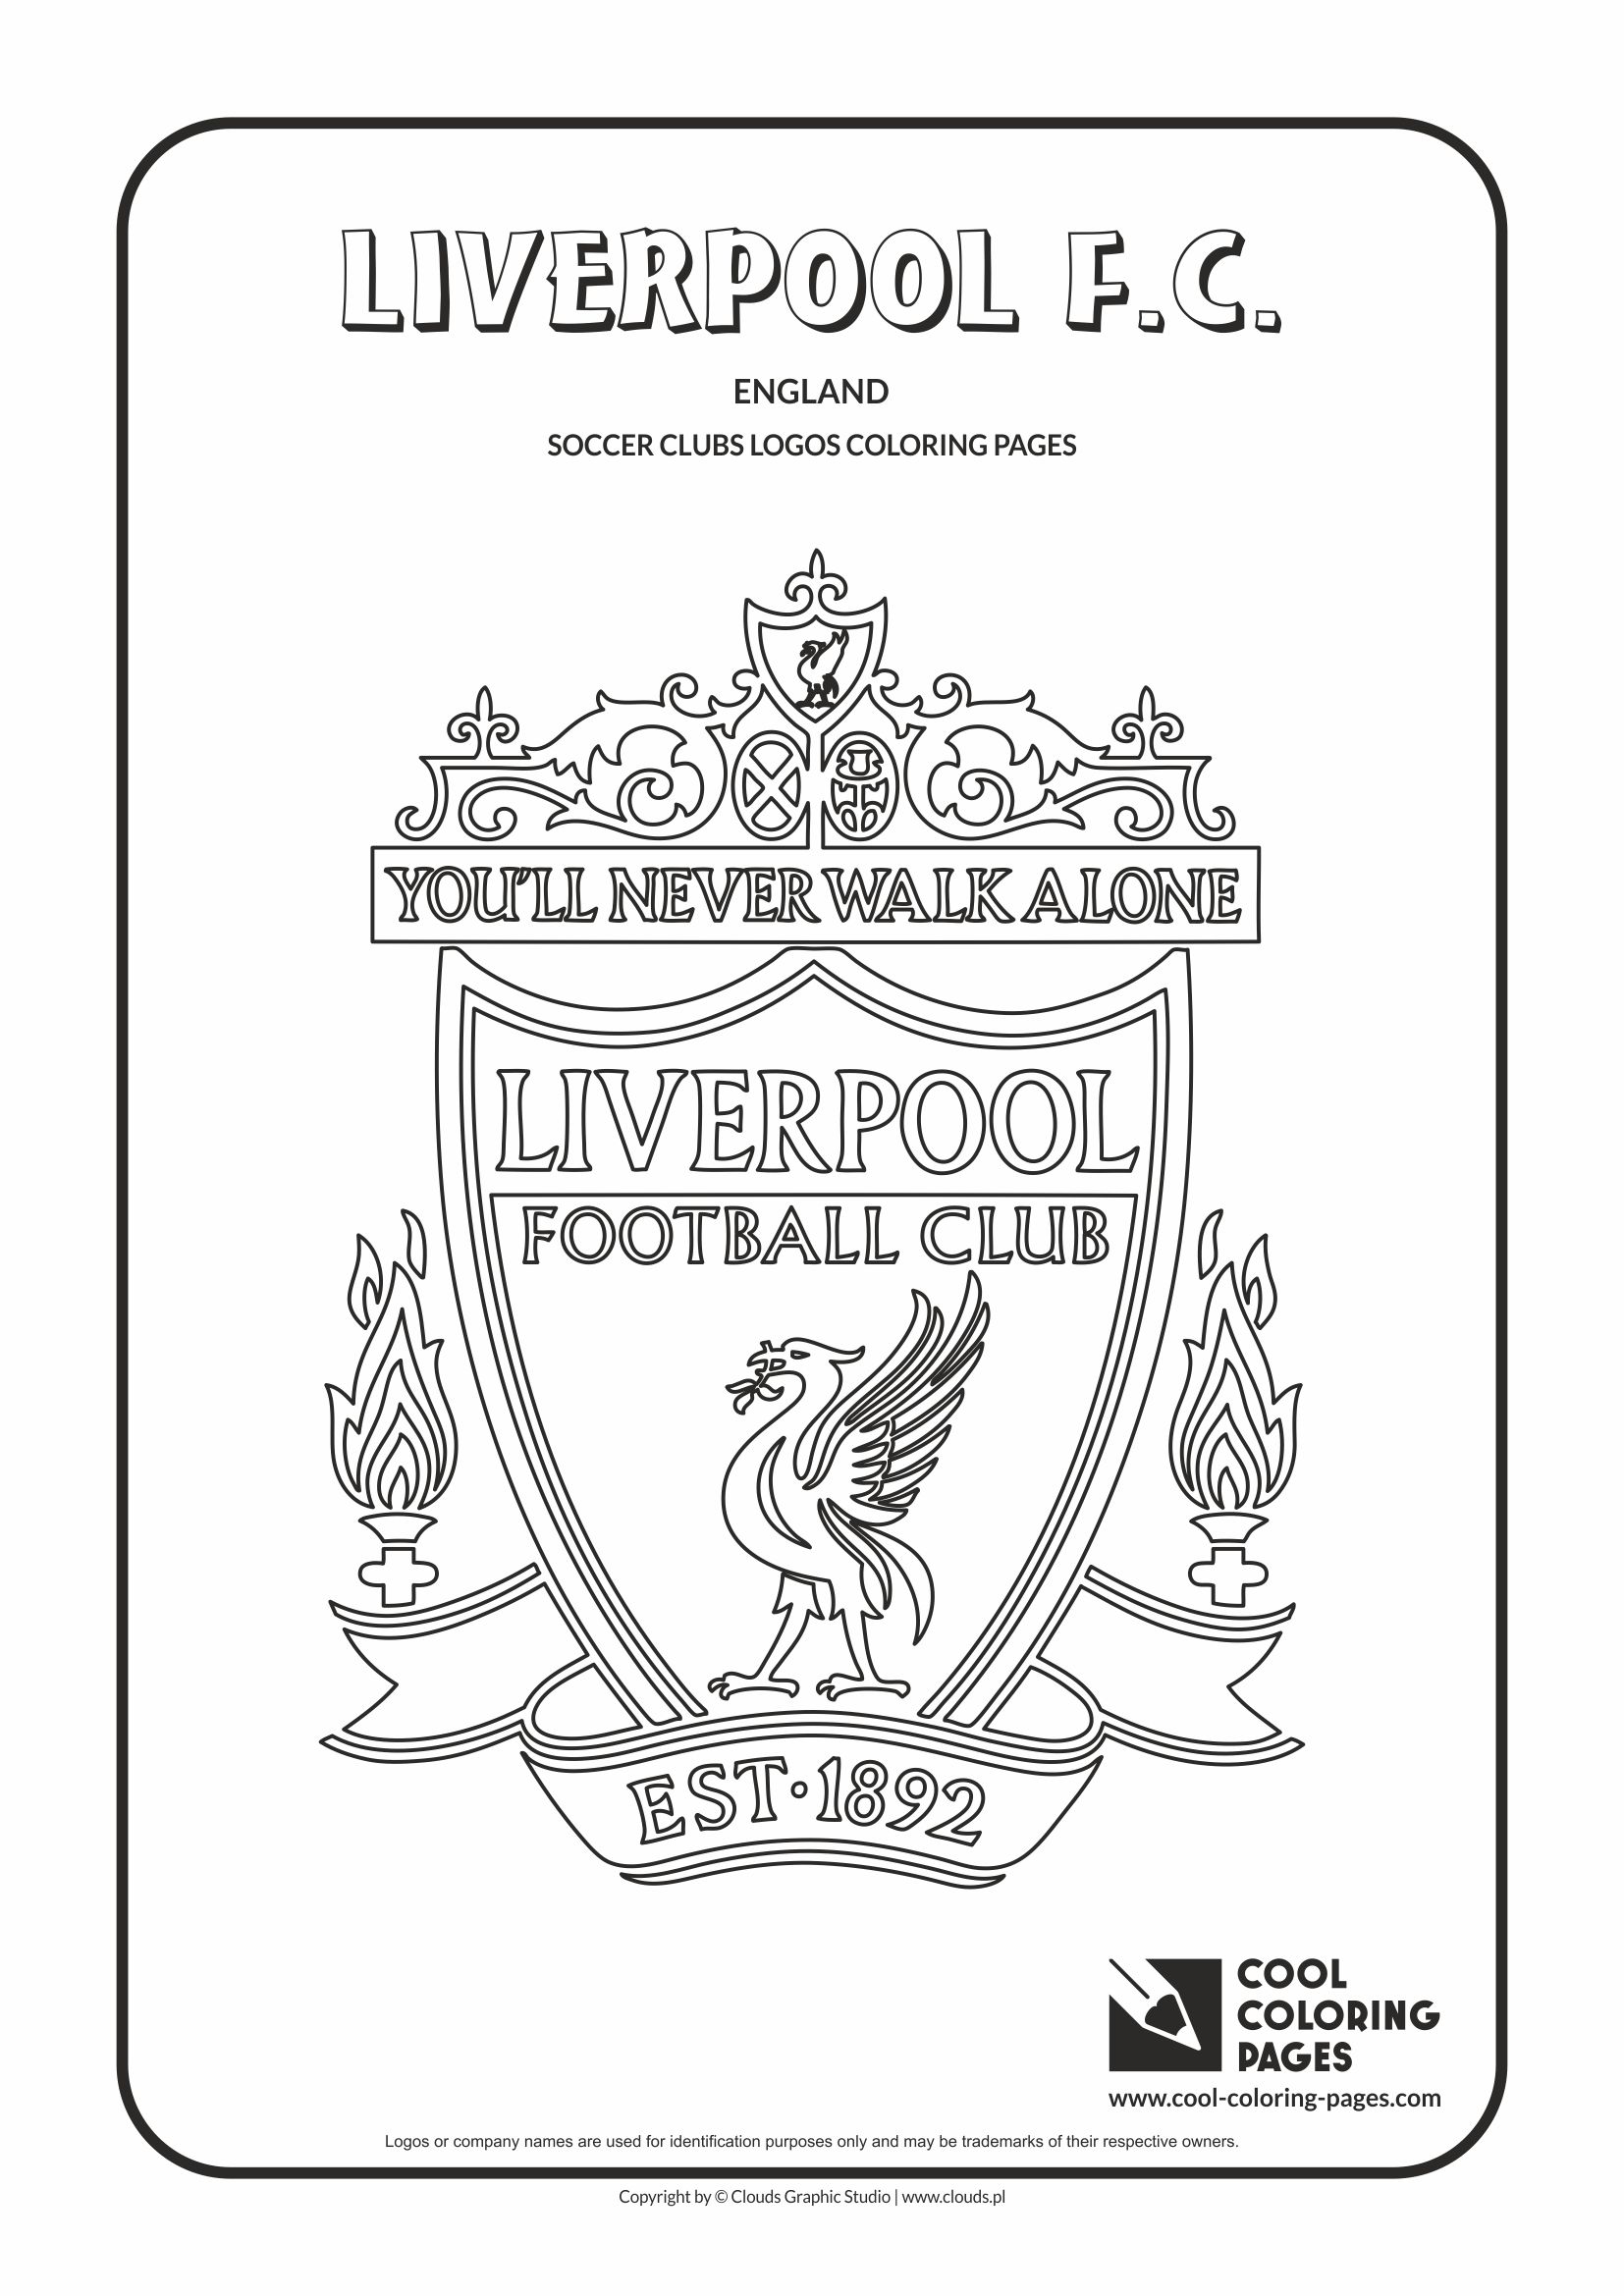 Cool Coloring Pages Liverpool F C Logo Coloring Page Cool Coloring Pages Free Educational Coloring Pages And Activities For Kids